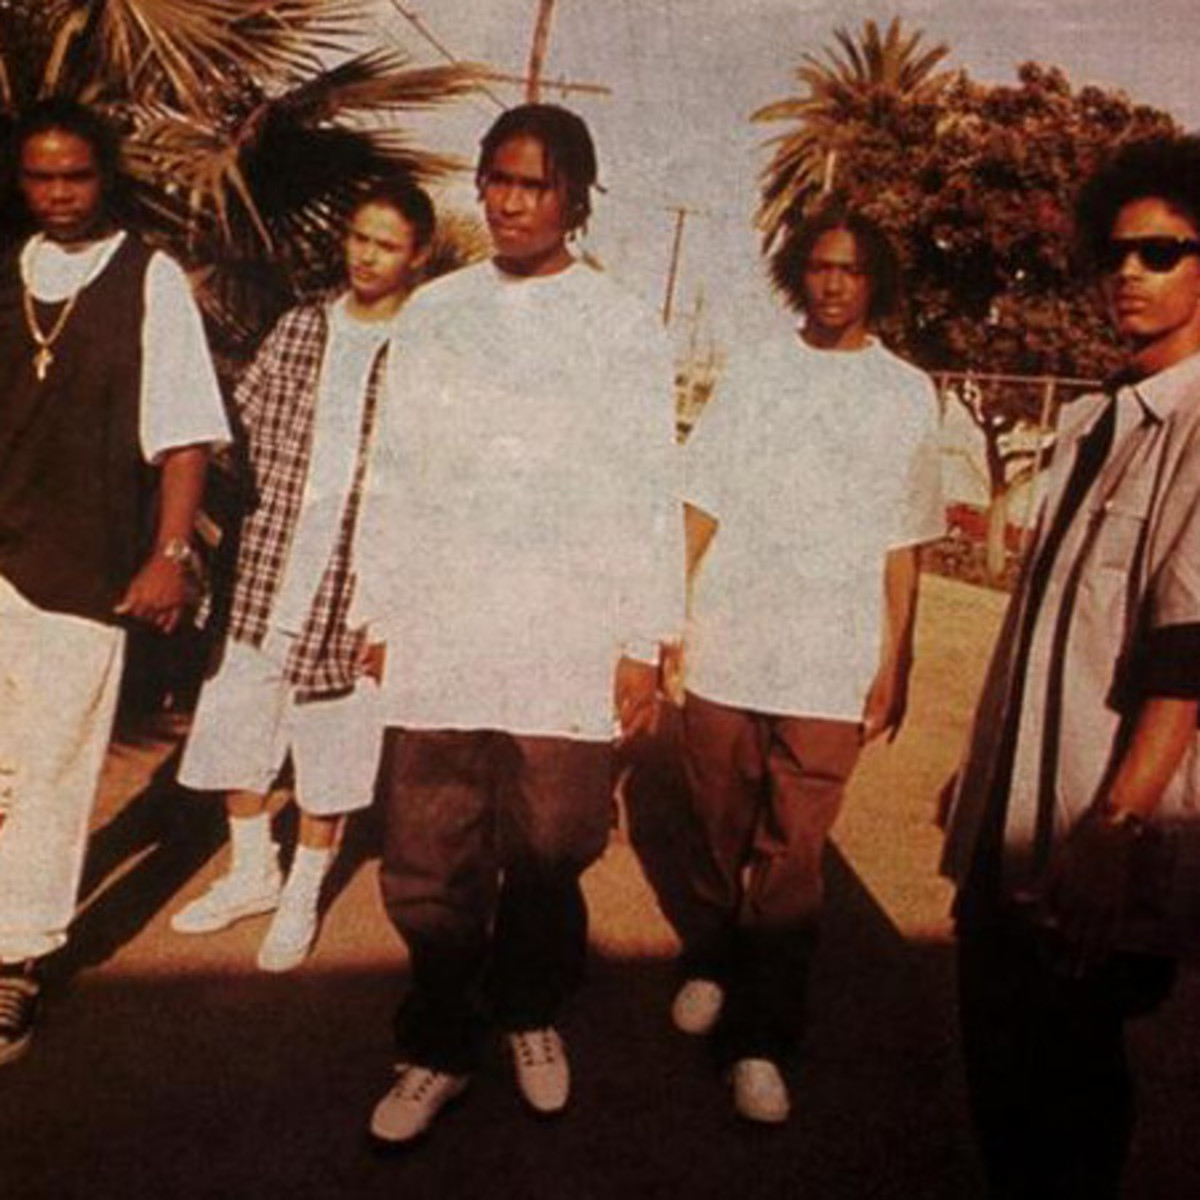 See You At The Crossroads What's Bone Thugs' Legacy? DJBooth